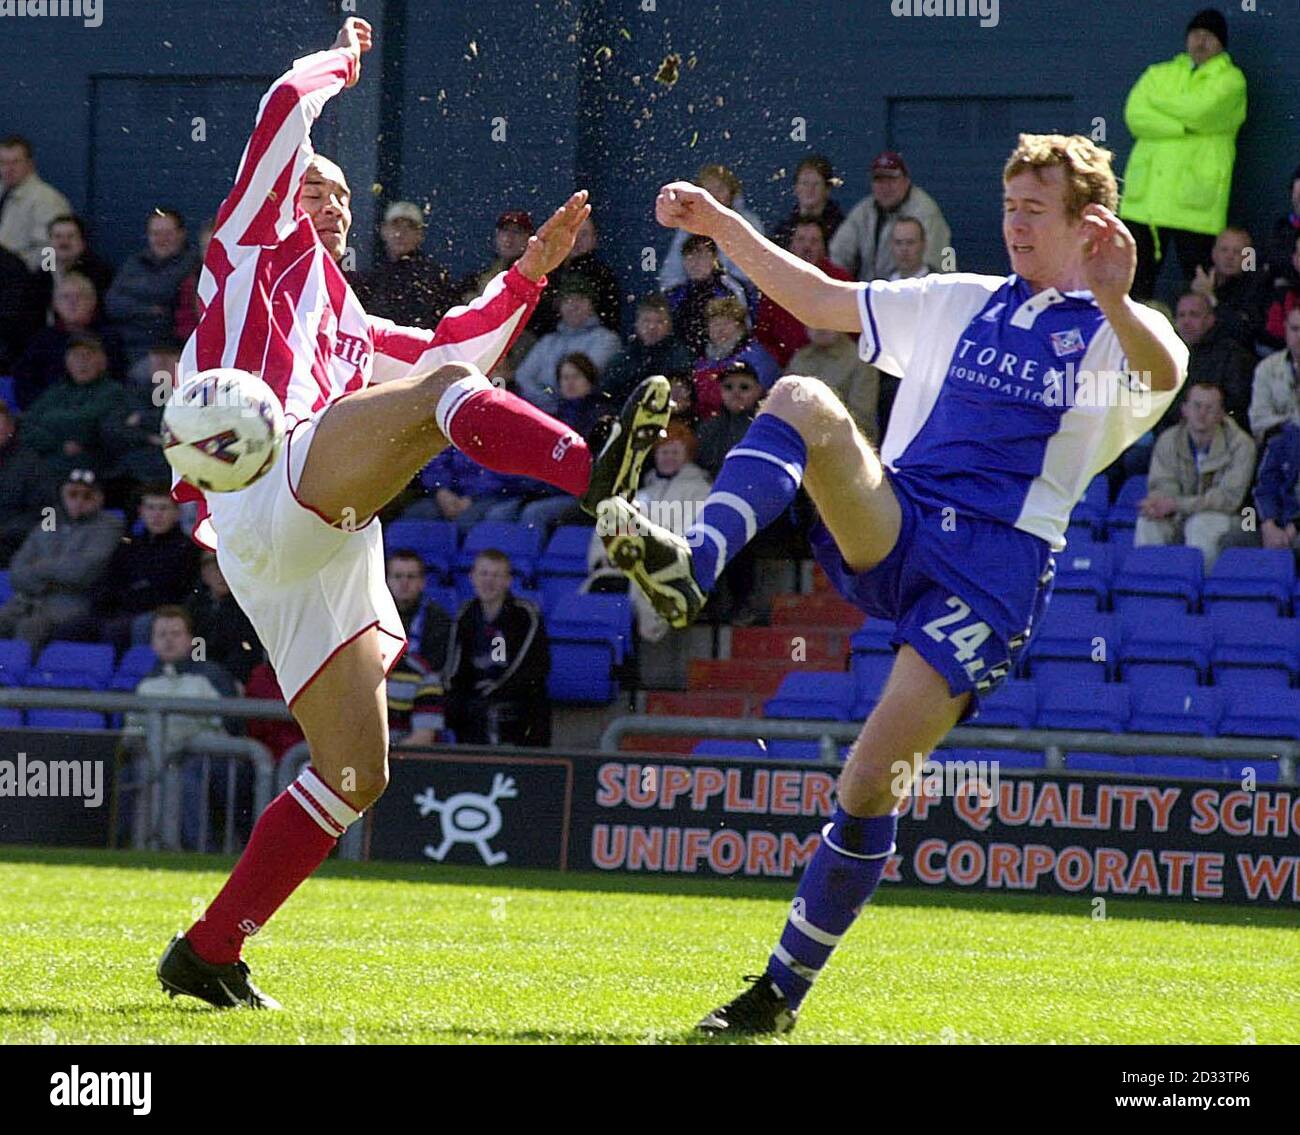 Stoke's Deon Burton (left) clashes with Oldham's Dean Holden during the Nationwide League Division Two match at Oldham's Boundary Park stadium. THIS PICTURE CAN ONLY BE USED WITHIN THE CONTEXT OF AN EDITORIAL FEATURE. NO UNOFFICIAL CLUB WEBSITE USE. Stock Photo